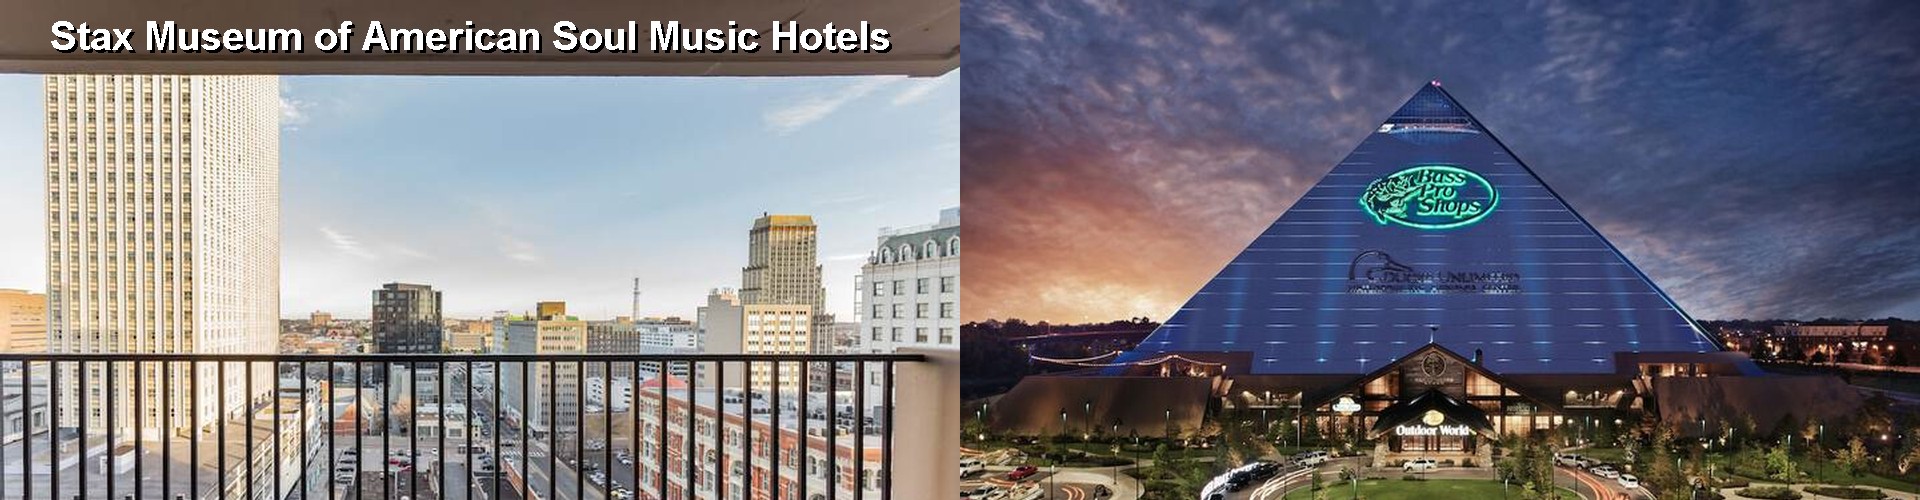 5 Best Hotels near Stax Museum of American Soul Music